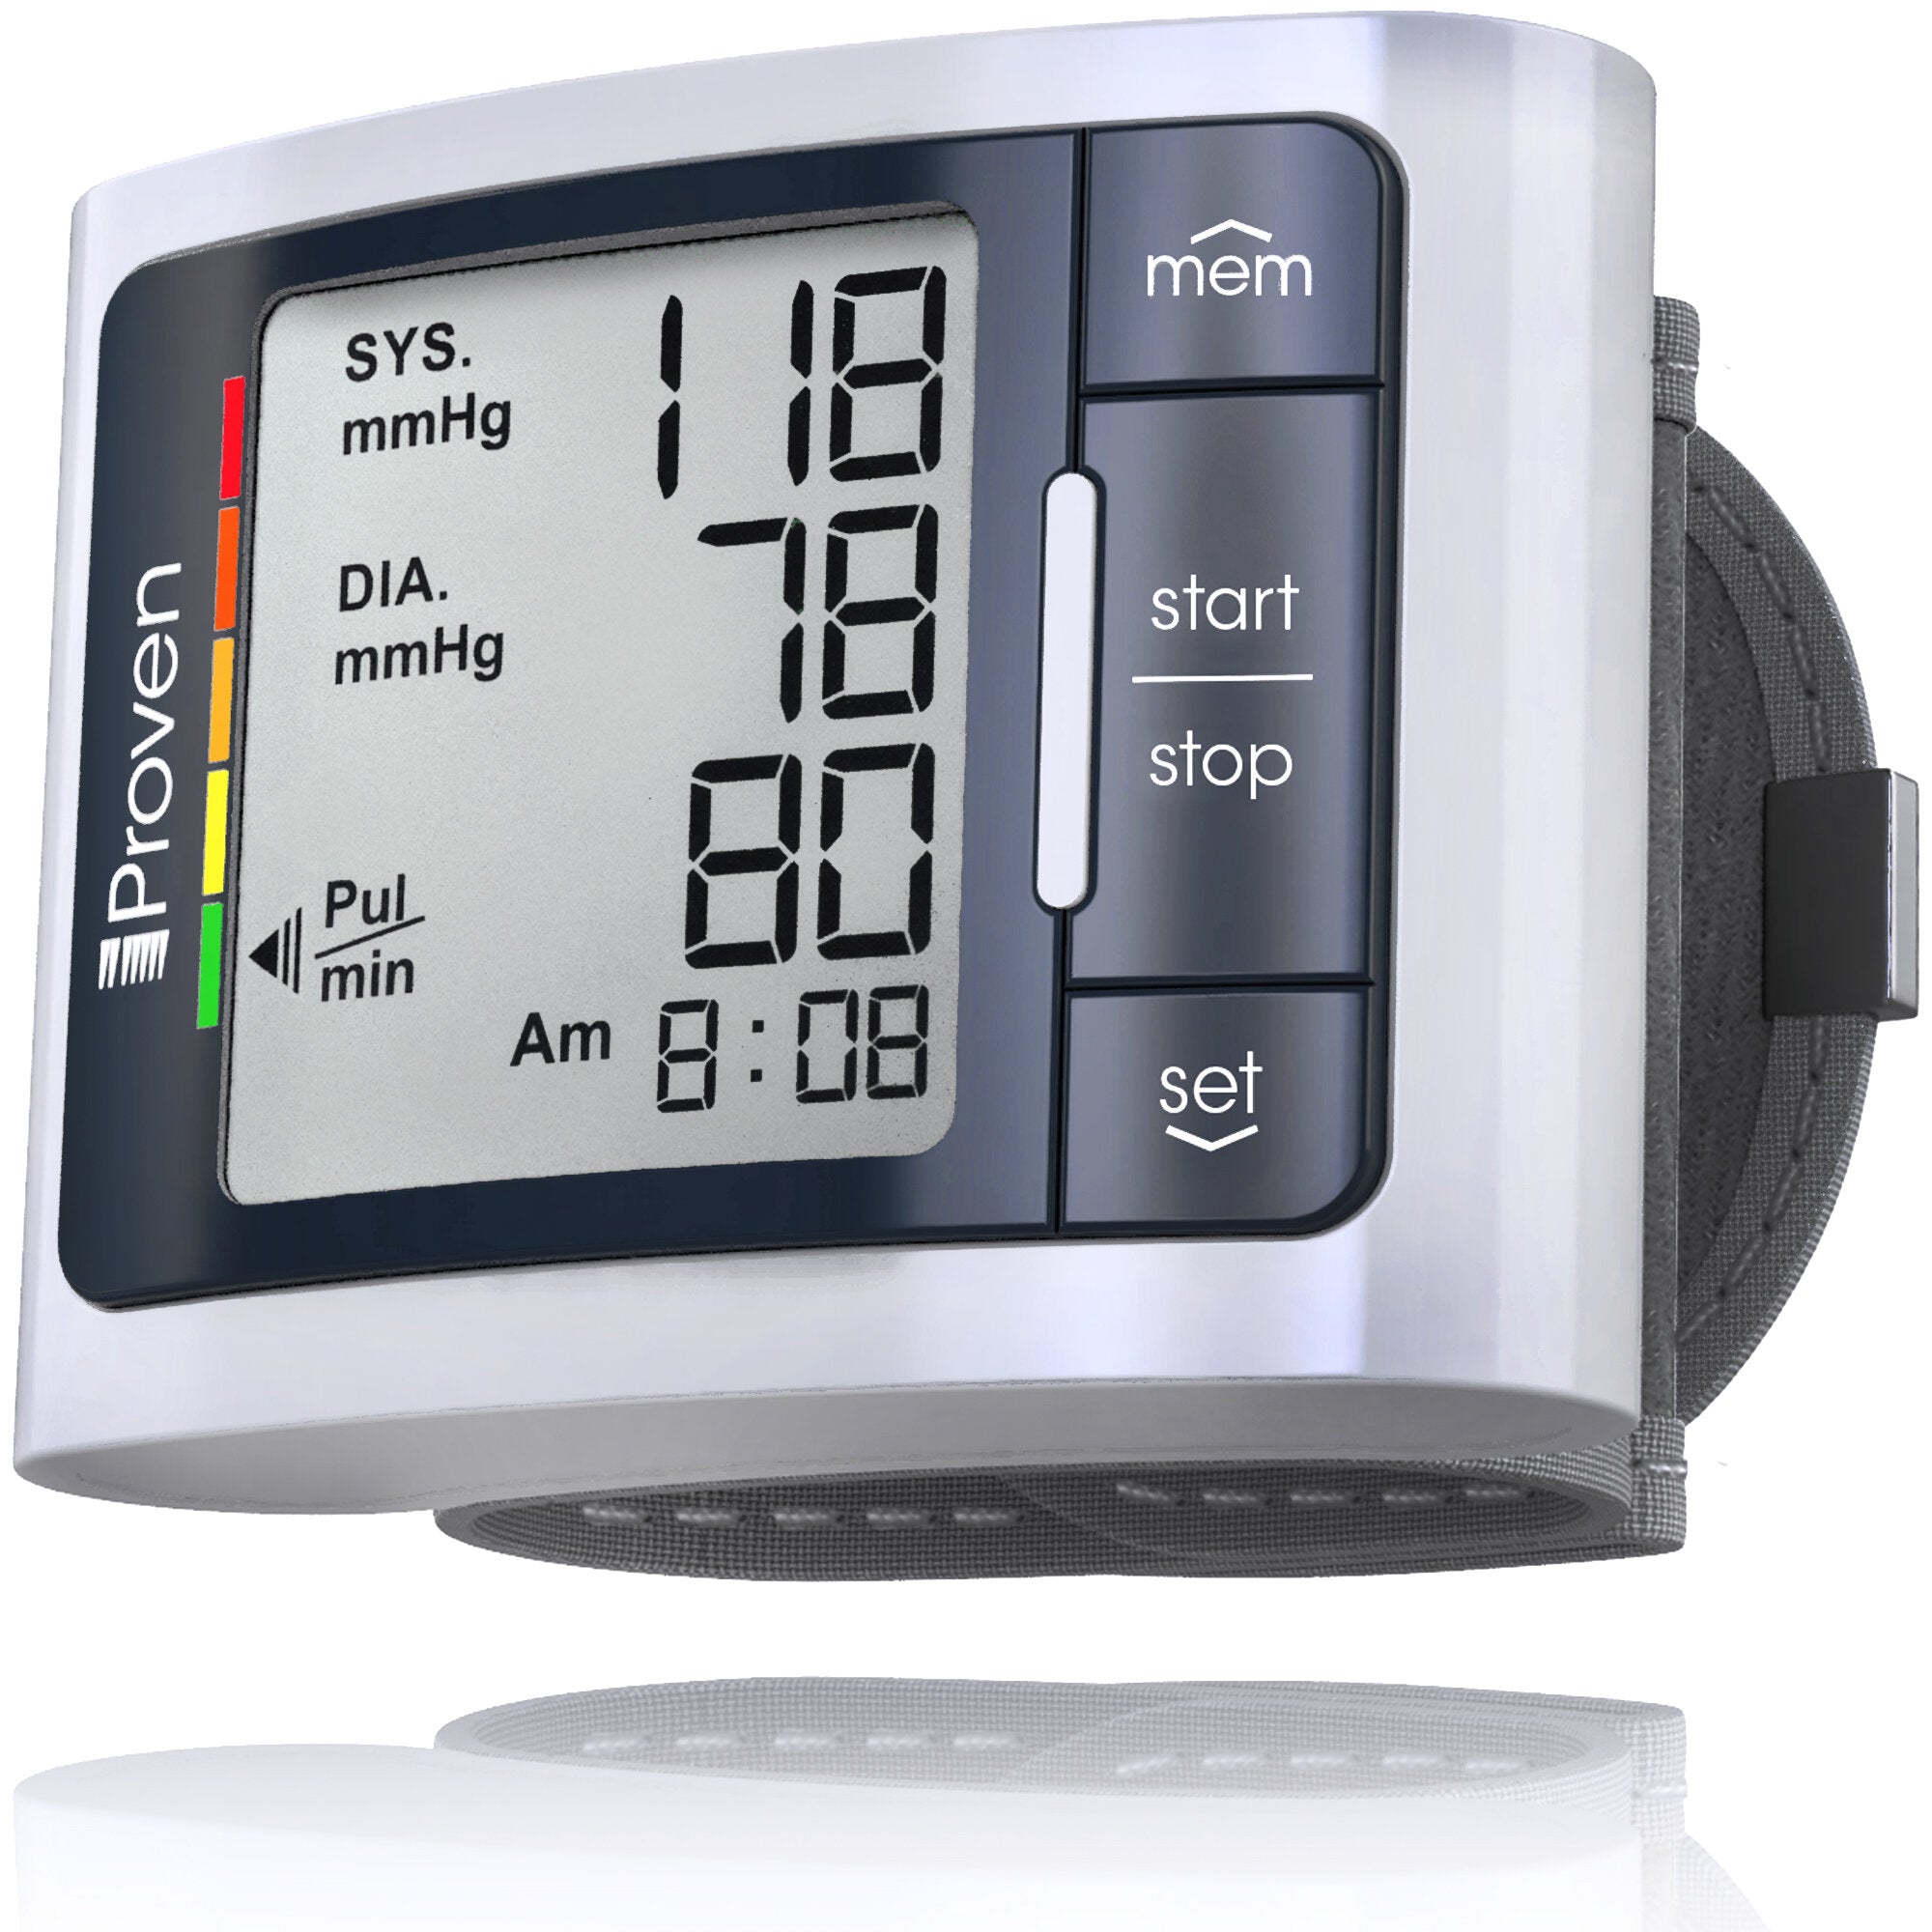  IPROVEN Upper Arm Blood Pressure Cuff, Easy to Use, Large  Display with Backlight, Large Cuff Adjustable 8¾ - 16½ inch, Automatic &  Accurate Blood Pressure Monitor for Home Use - BPM-656 